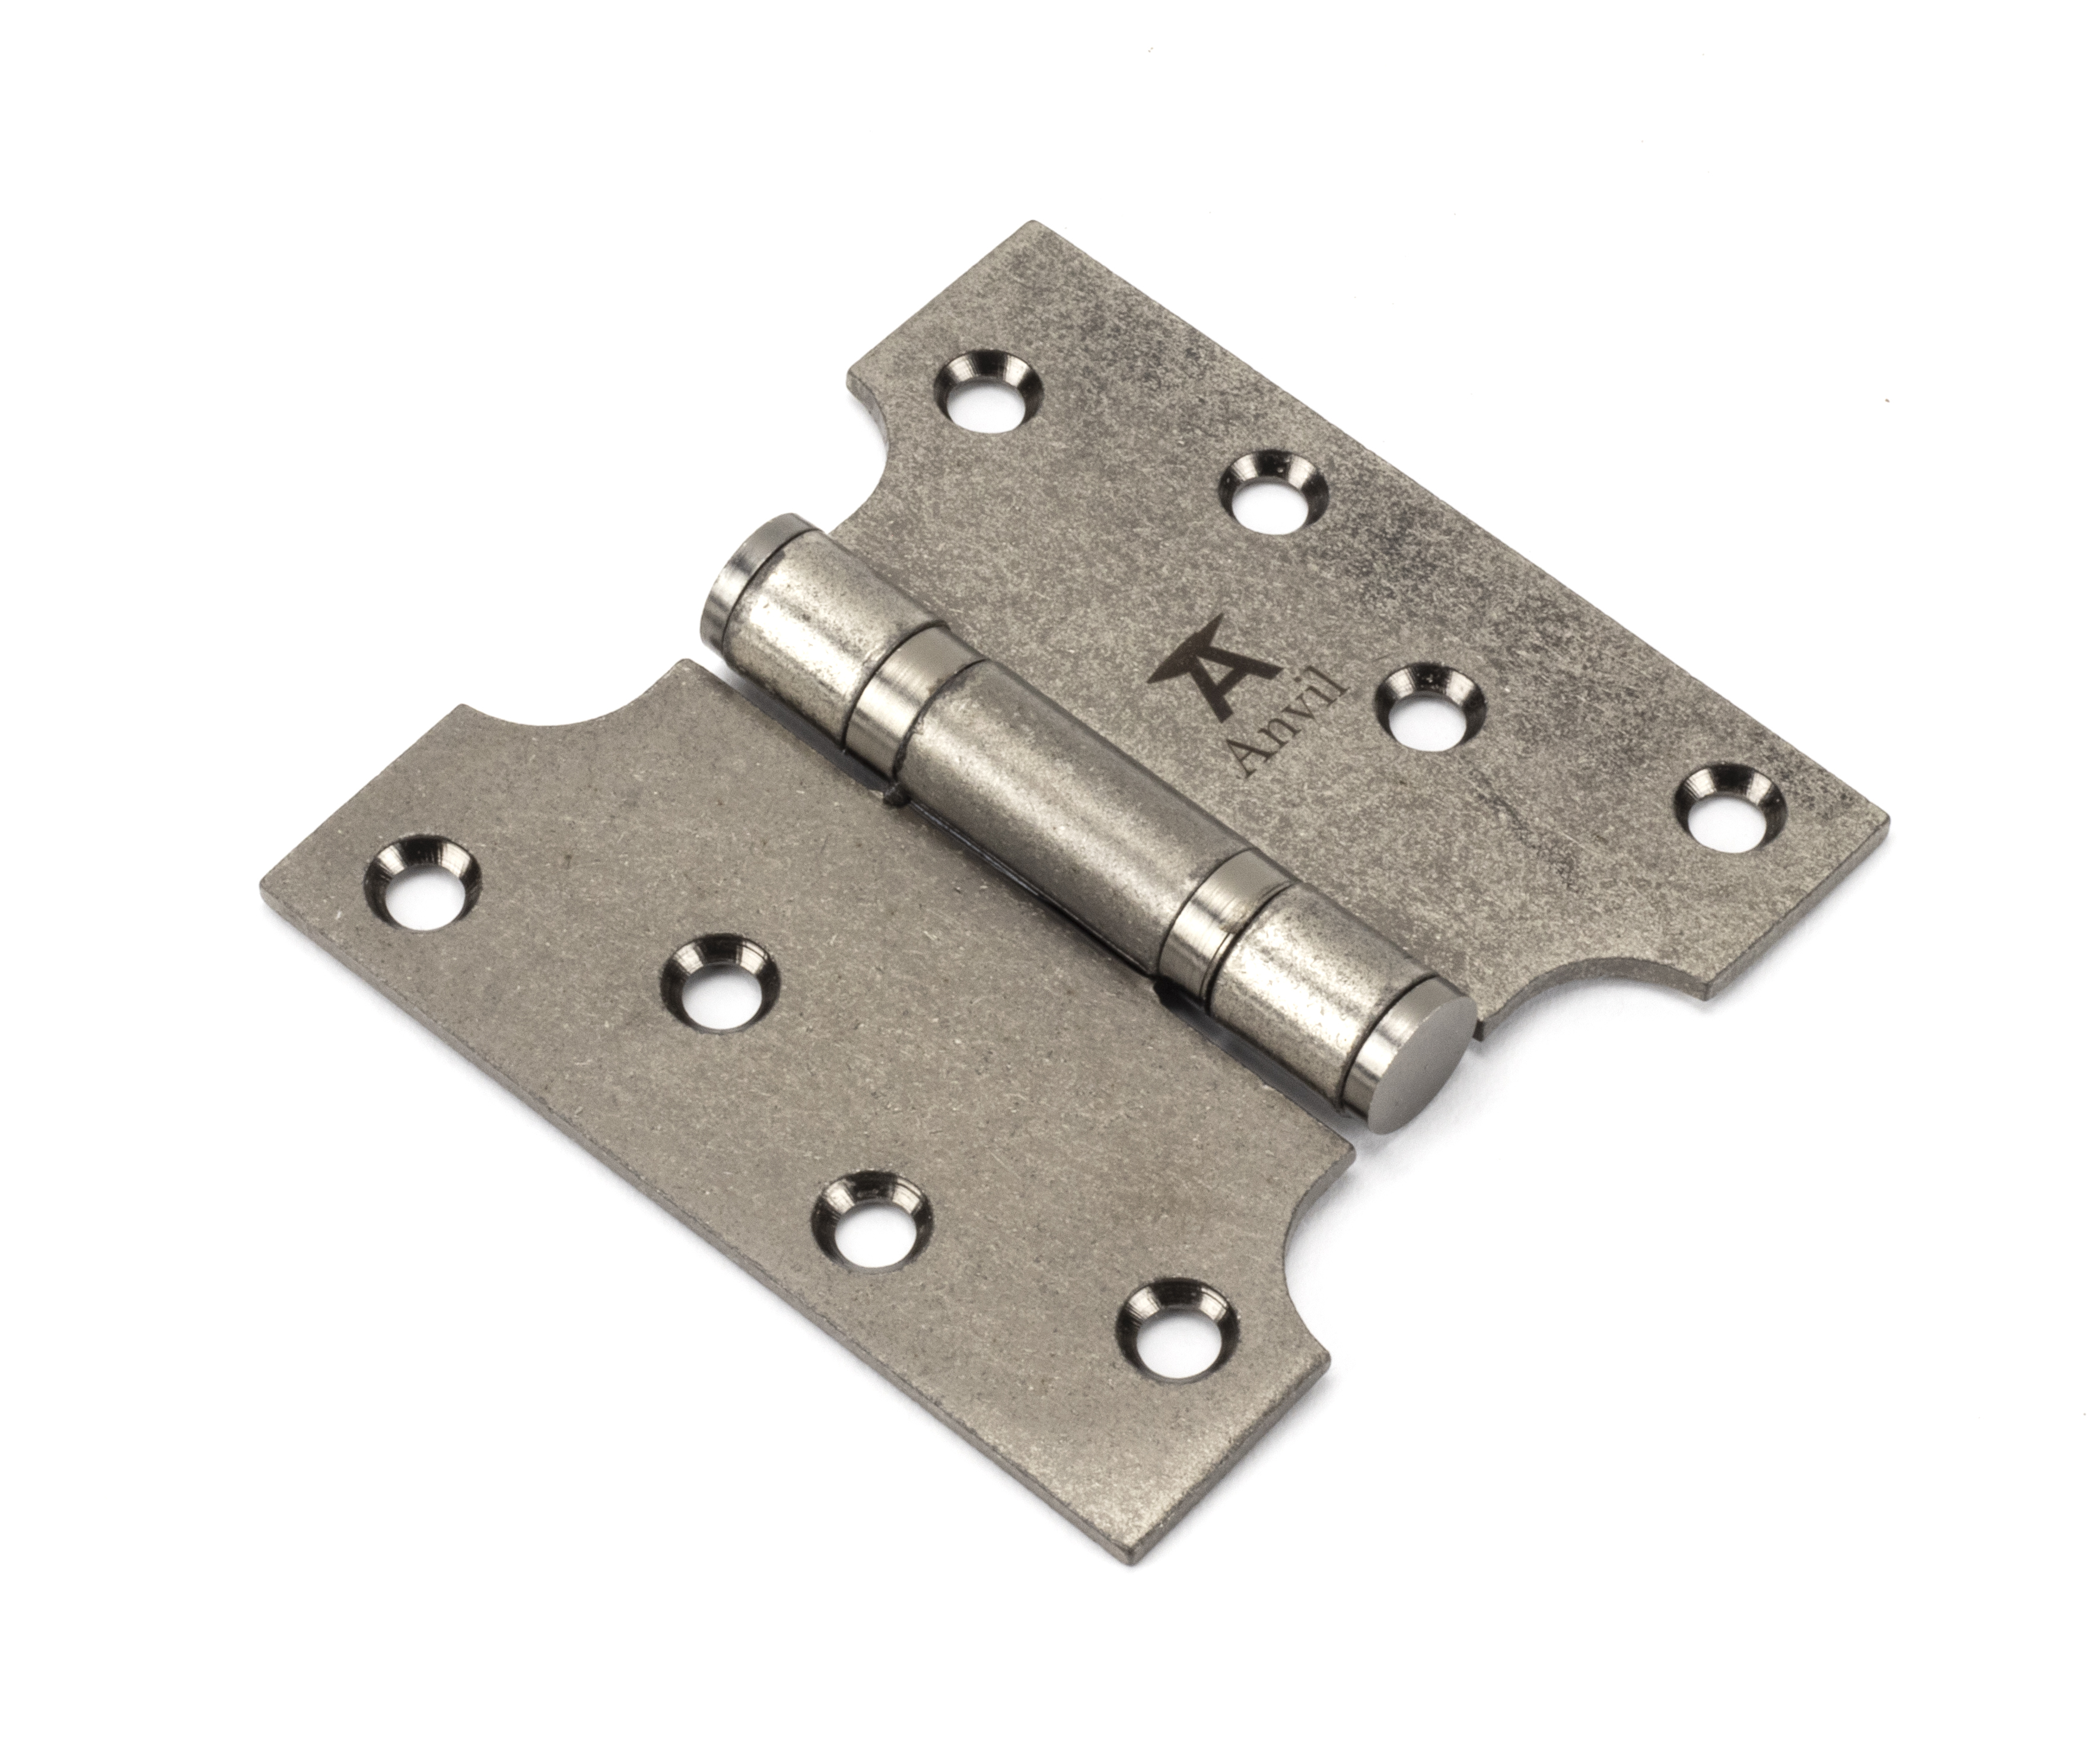 Stainless Steel Parliament Hinge - 4" x 2" x 4" - Pair